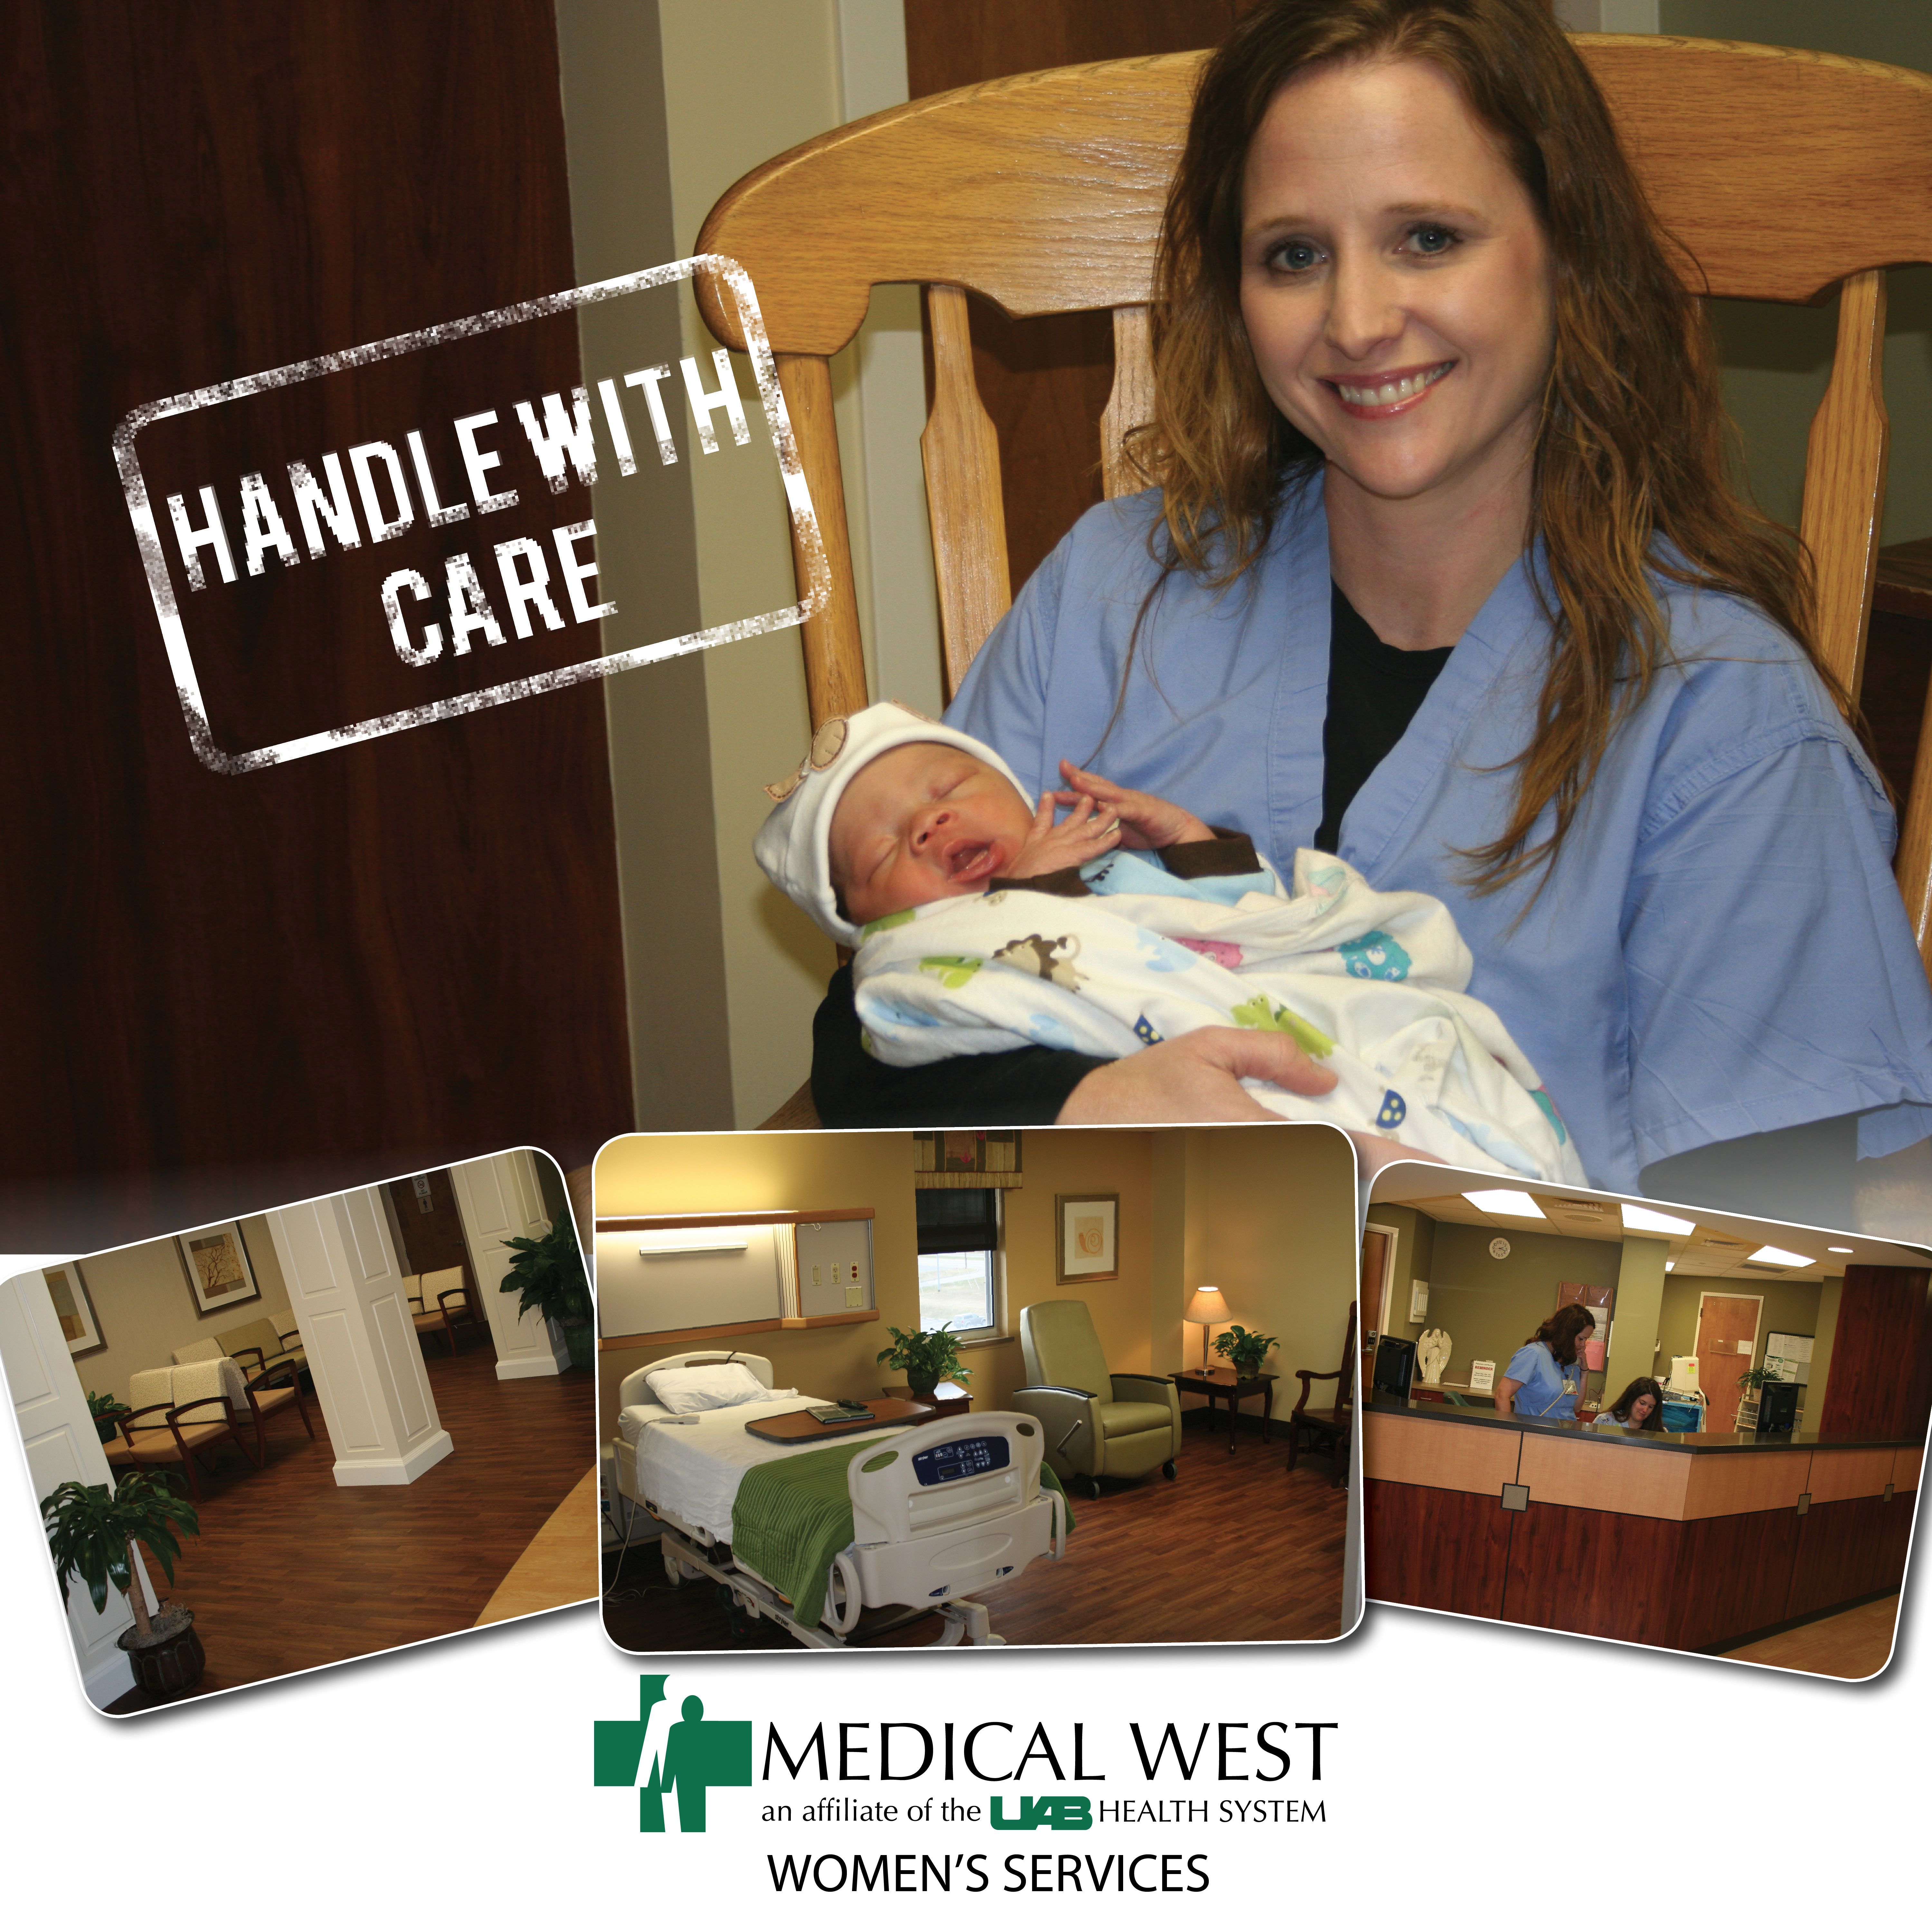 nursing holds newborn baby at Women's Services unit at Medical West Hospital